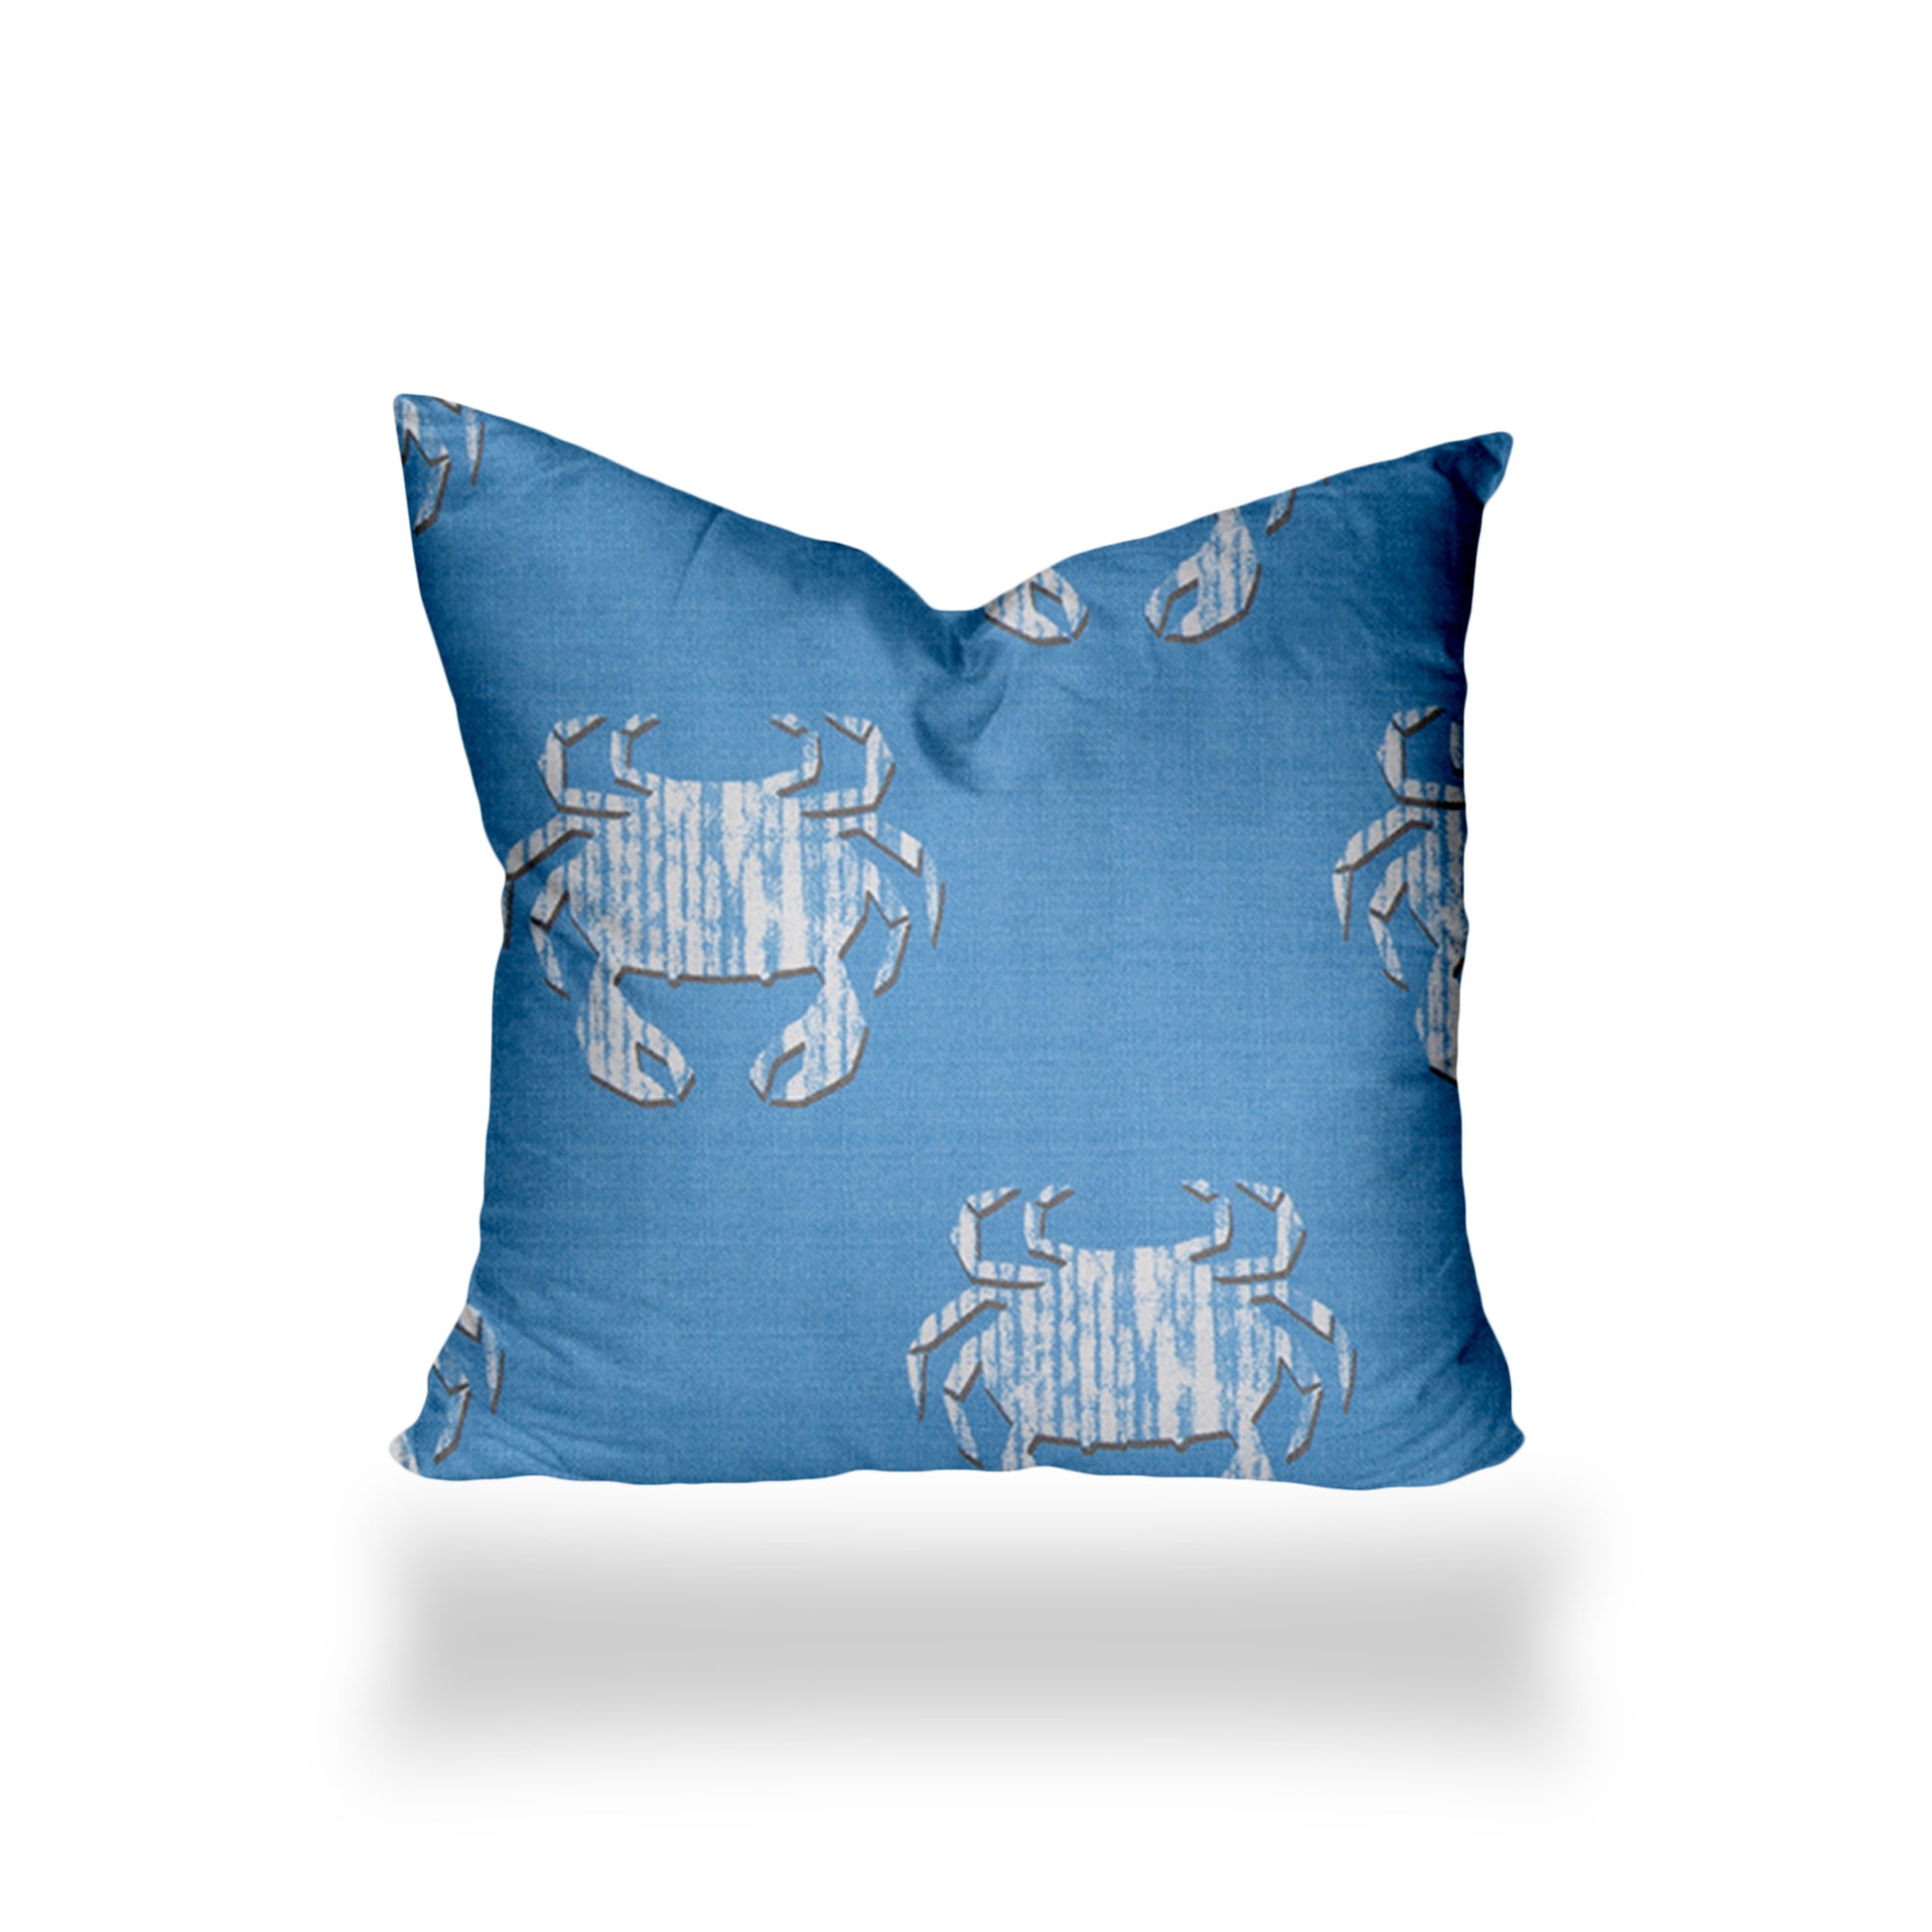 CRABBY Indoor Outdoor Soft Royal Pillow, Zipper Cover multicolor-polyester